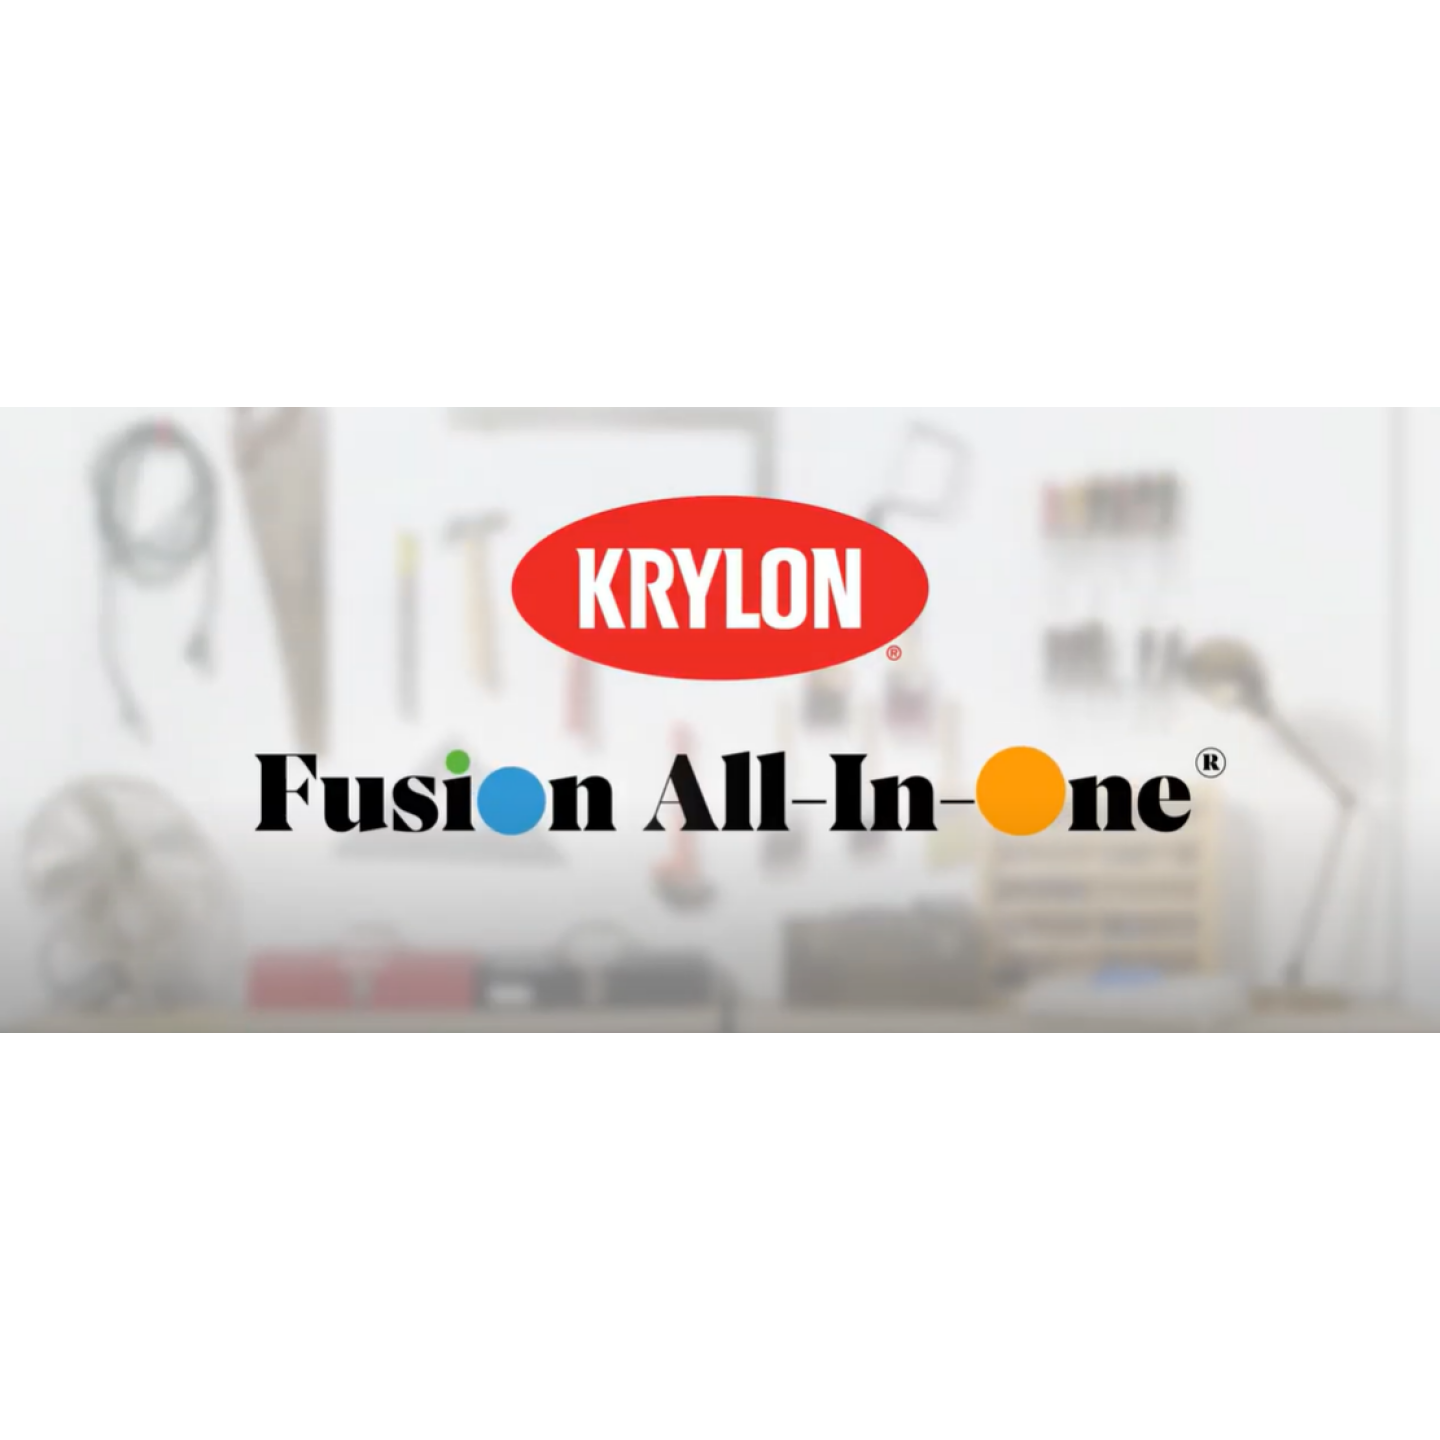 Krylon Fusion All-In-One Gloss Gold Metallic Spray Paint and Primer In One  (NET WT. 12-oz